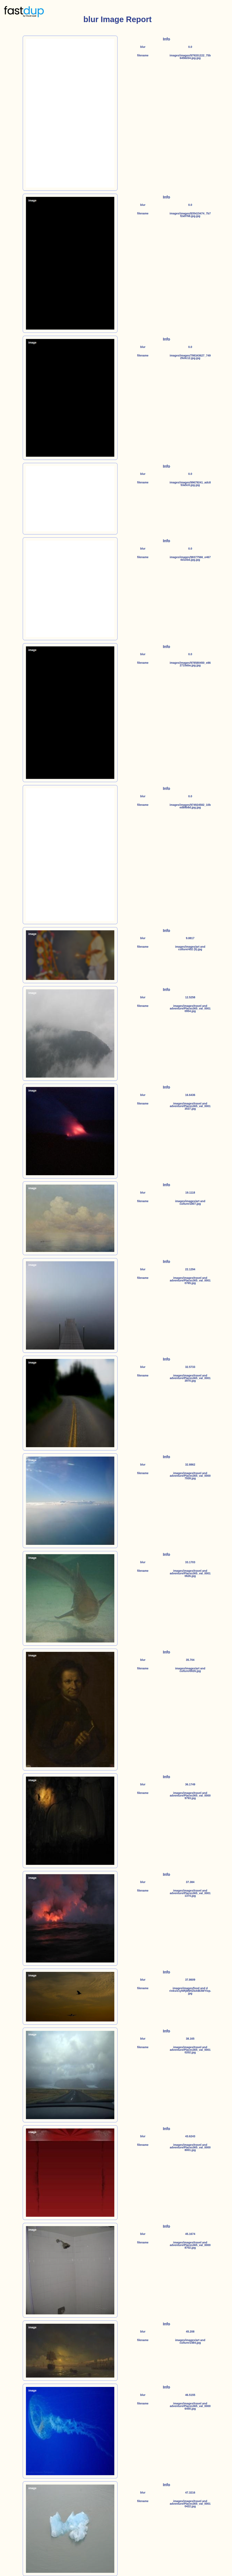 A generated gallery of blur images.